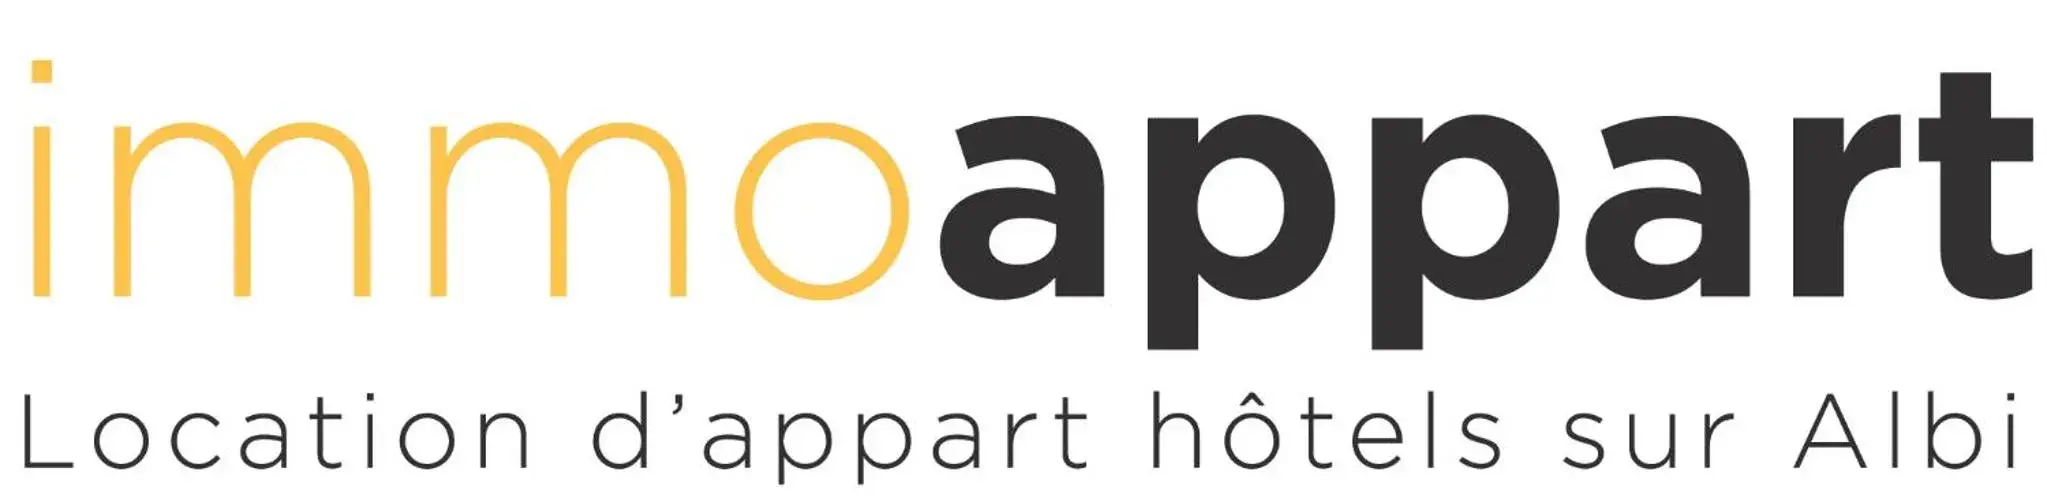 Property logo or sign in Immoappart 